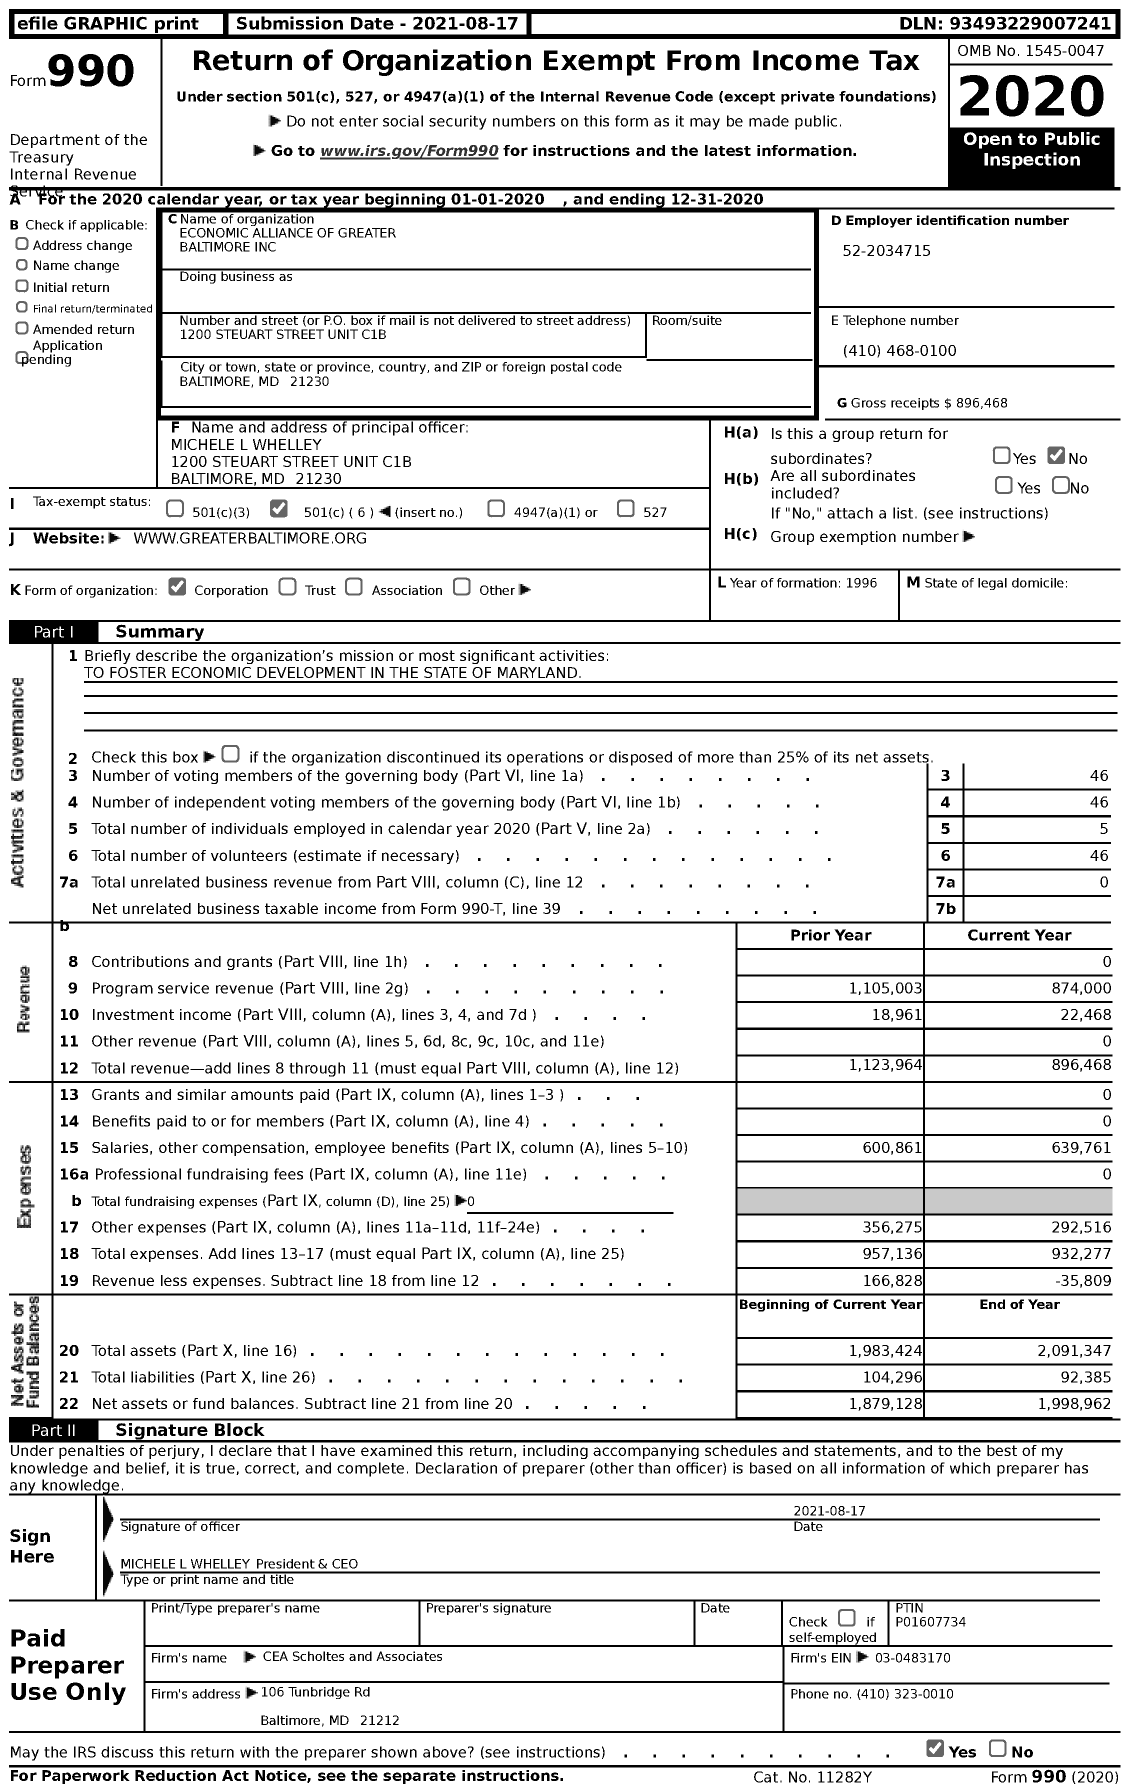 Image of first page of 2020 Form 990 for Economic Alliance of Greater Baltimore